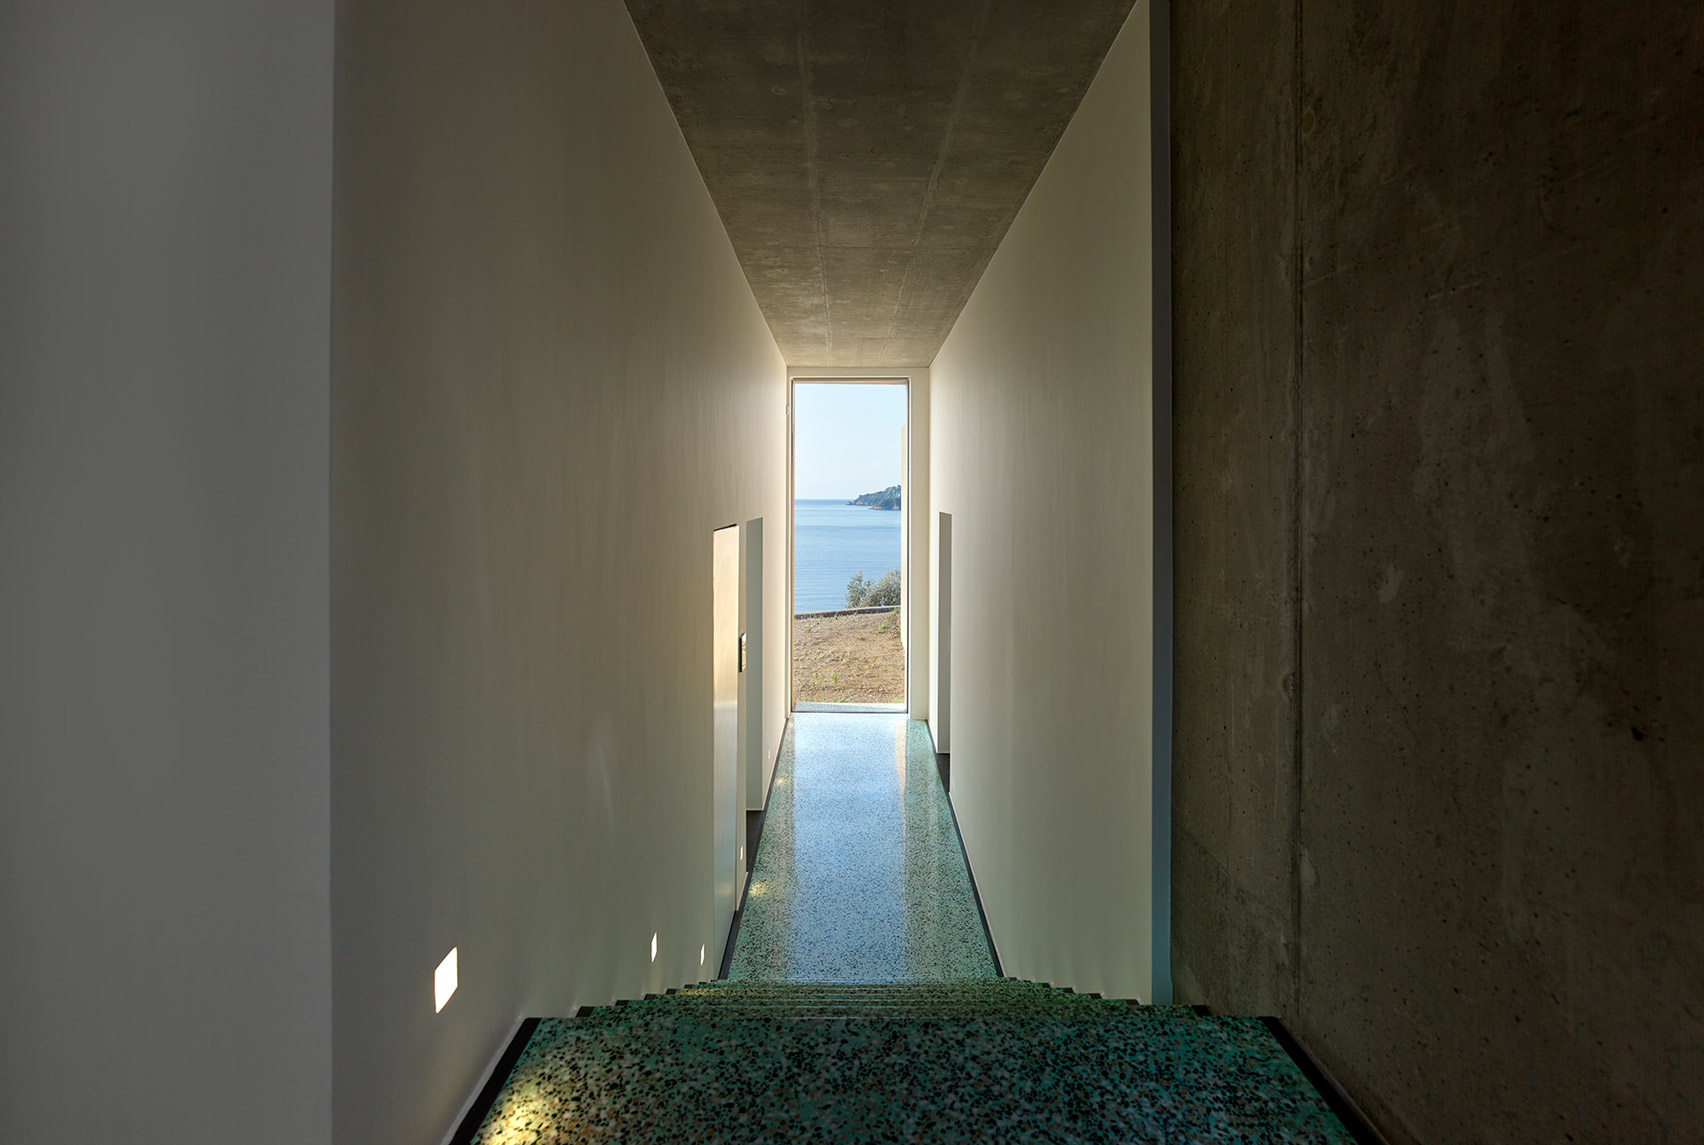 Greek island home by Lydia Xynogala fans out to maximise sea views